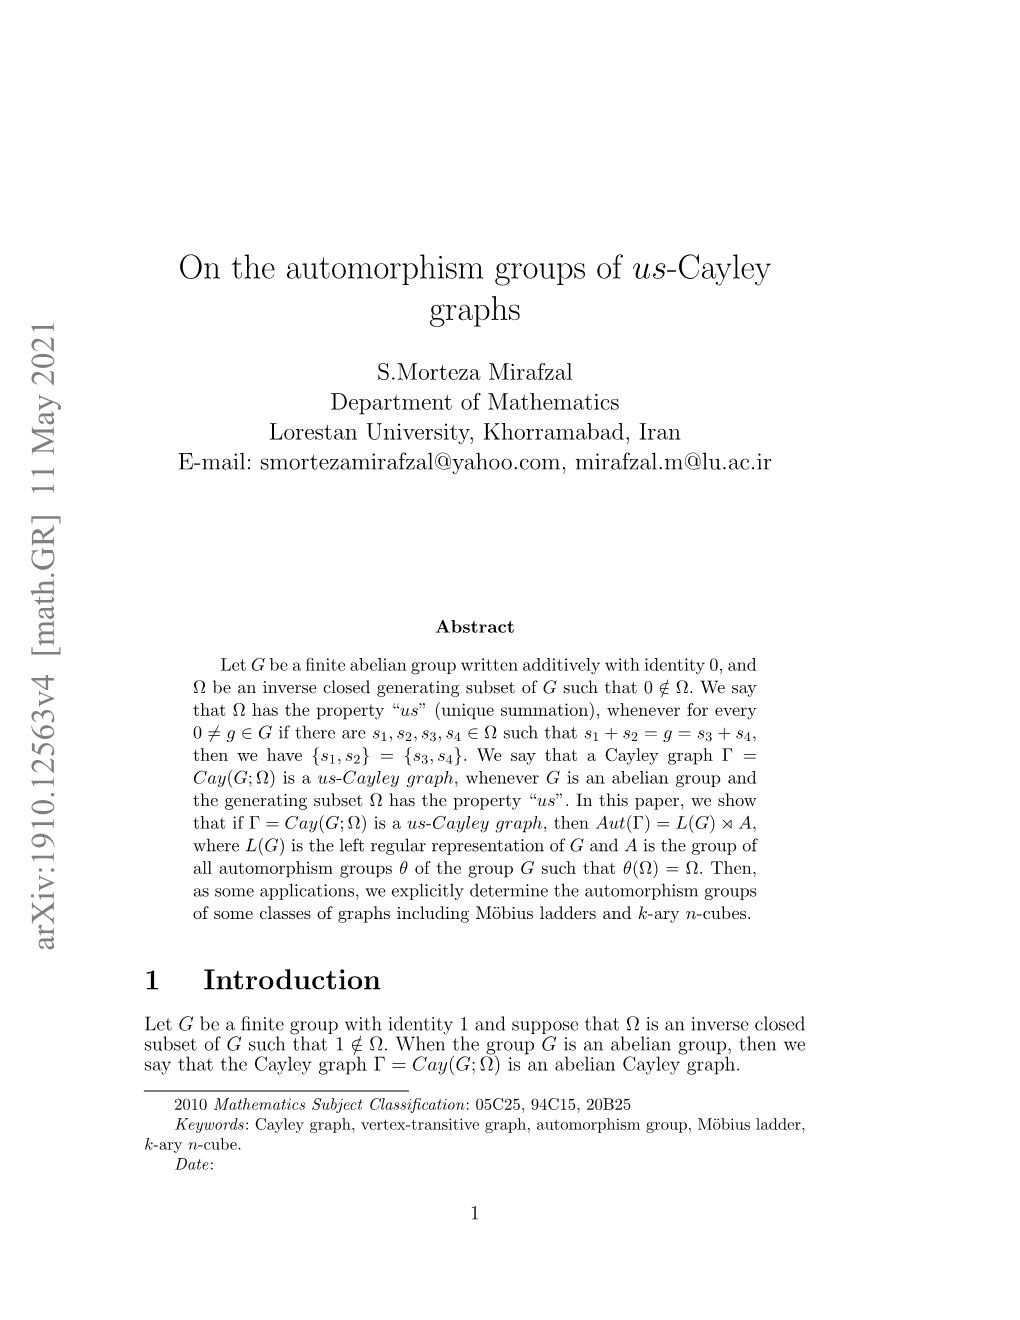 On the Automorphism Groups of Us-Cayley Graphs